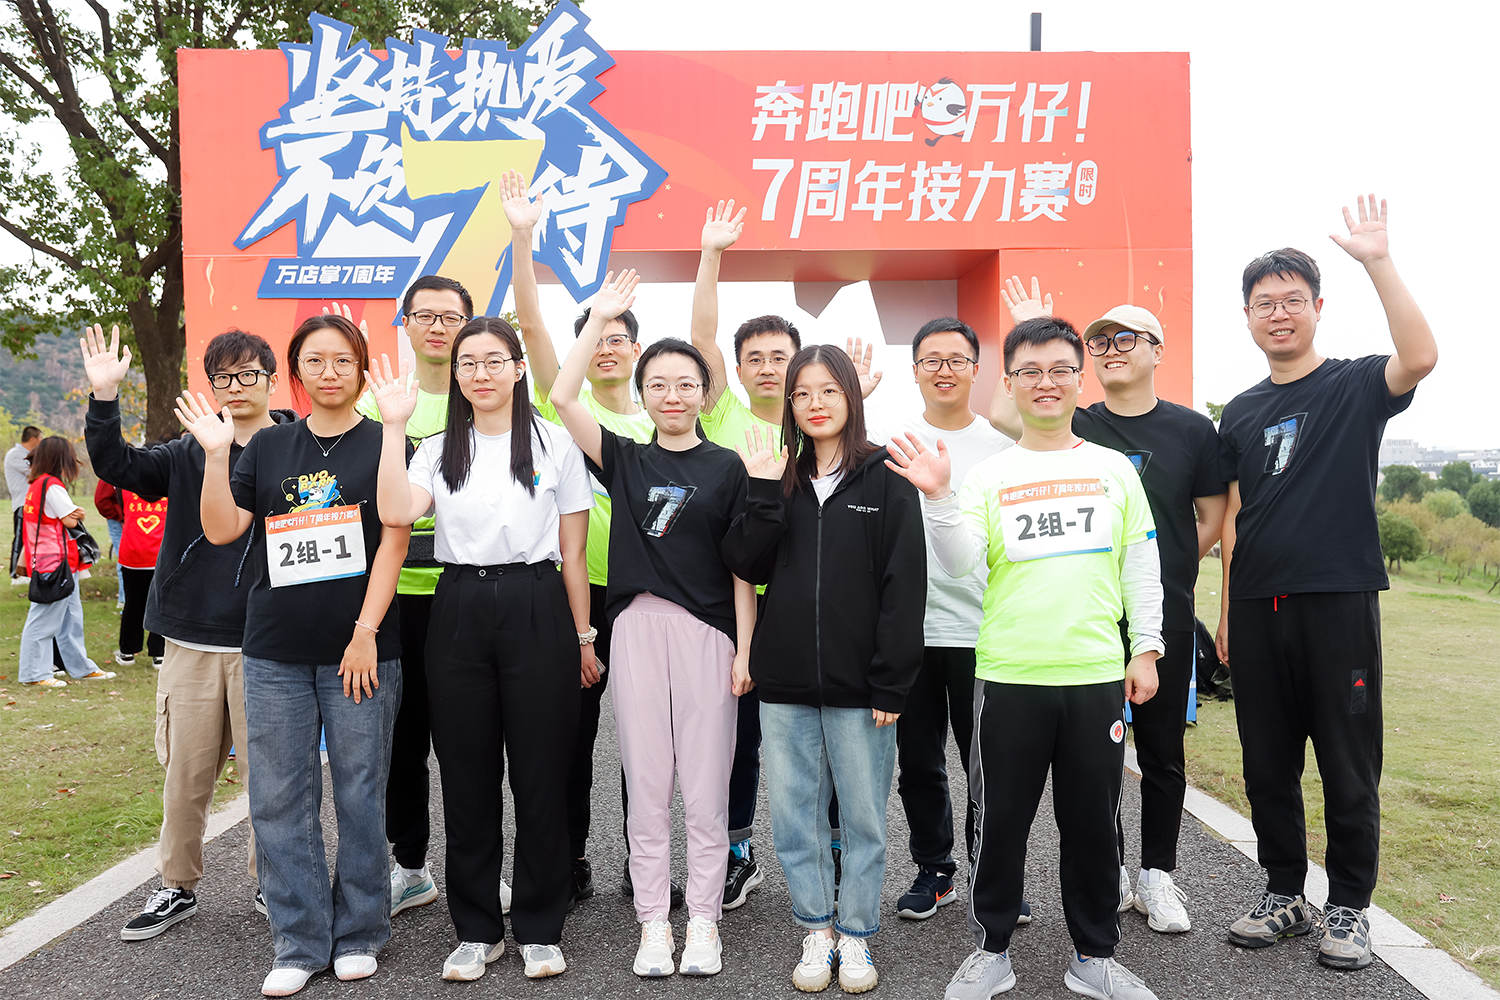 opretail-life-7th-anniversary-running-event-1